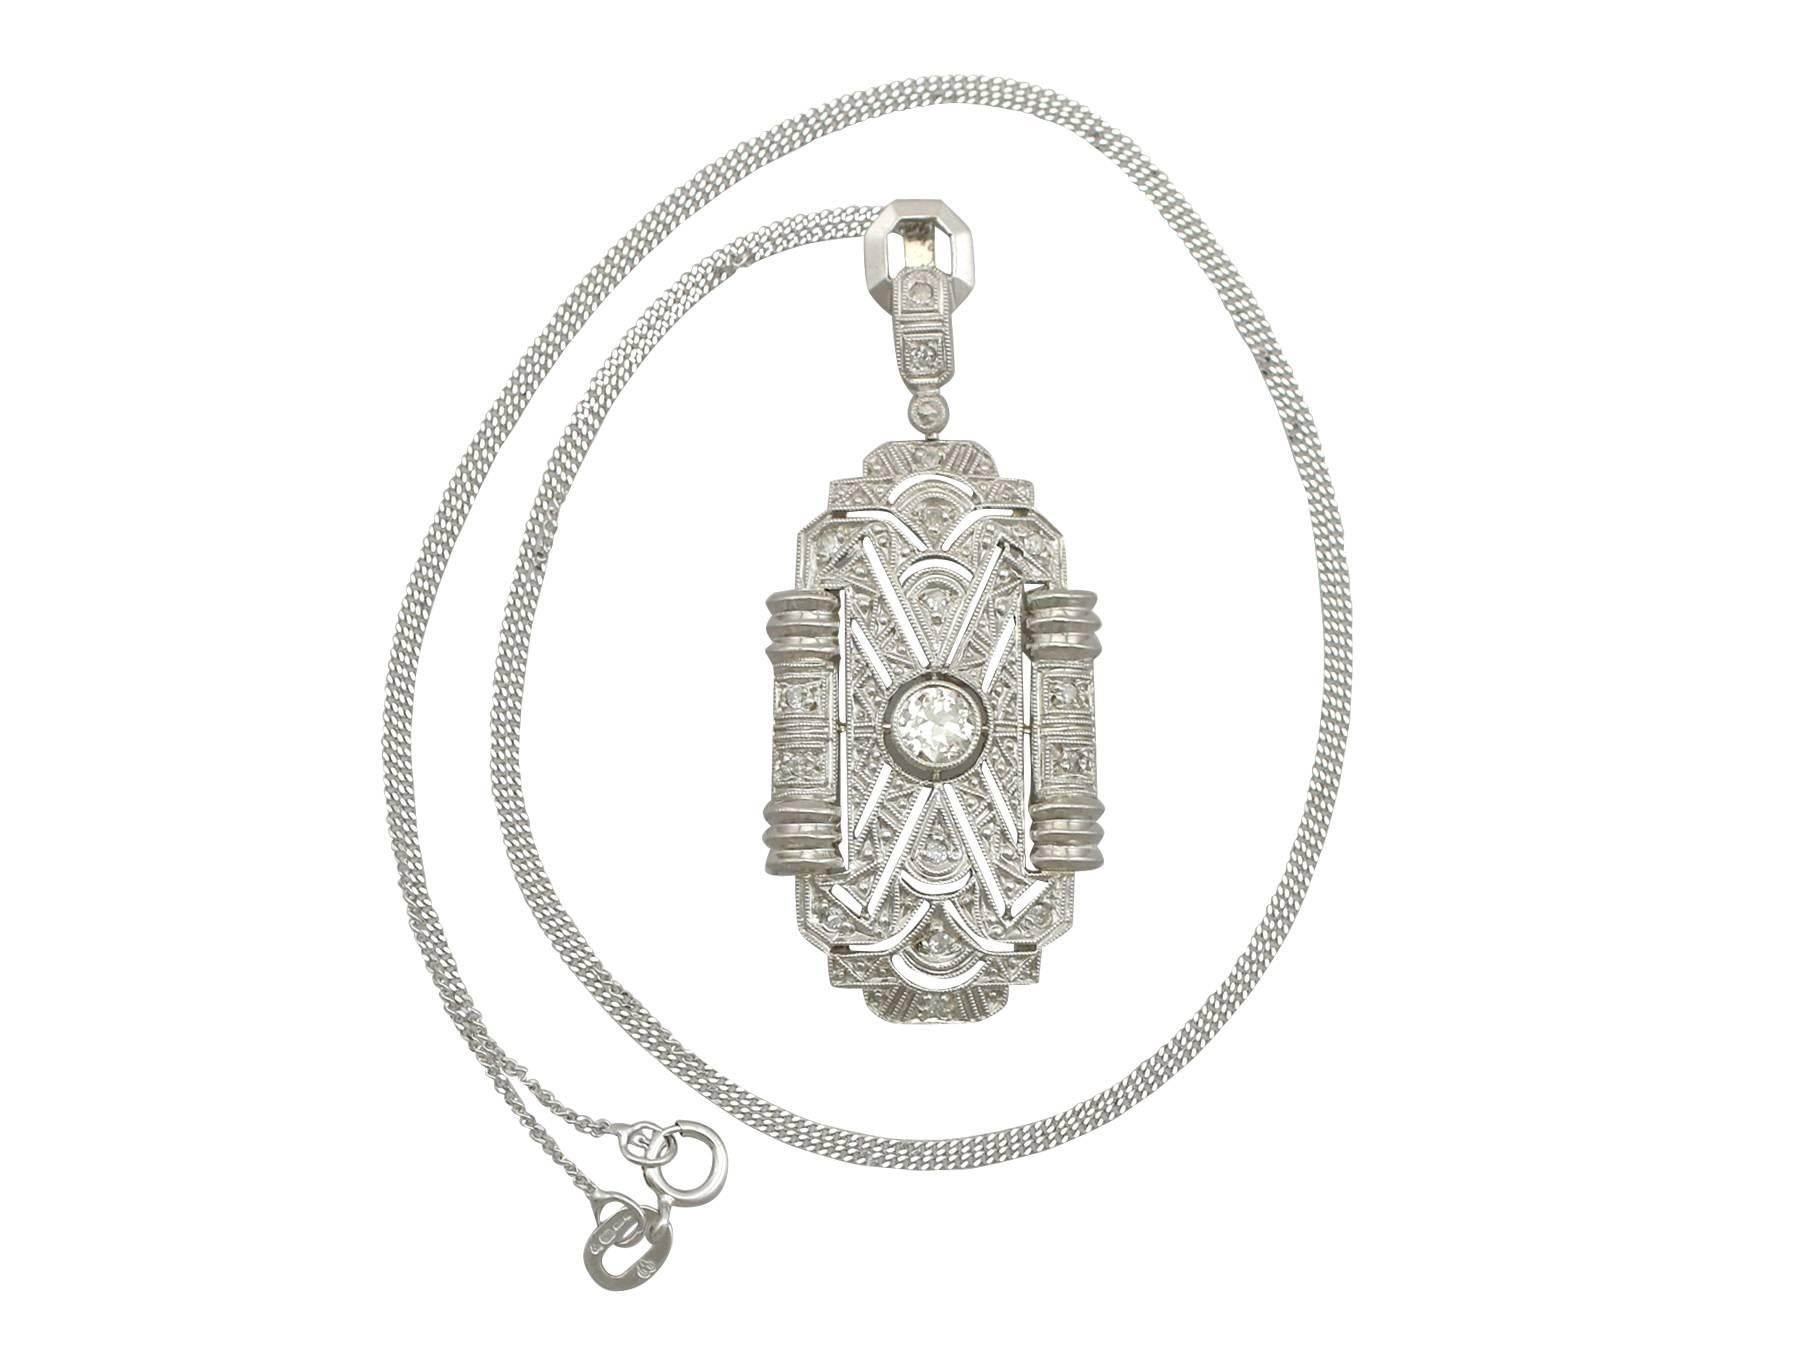 A fine and impressive Art Deco 0.36 carat diamond and 18 karat white gold pendant; part of our diverse antique jewelry and estate jewelry collections

This fine and impressive antique 1920's pendant has been crafted in 18k white gold.

The iconic